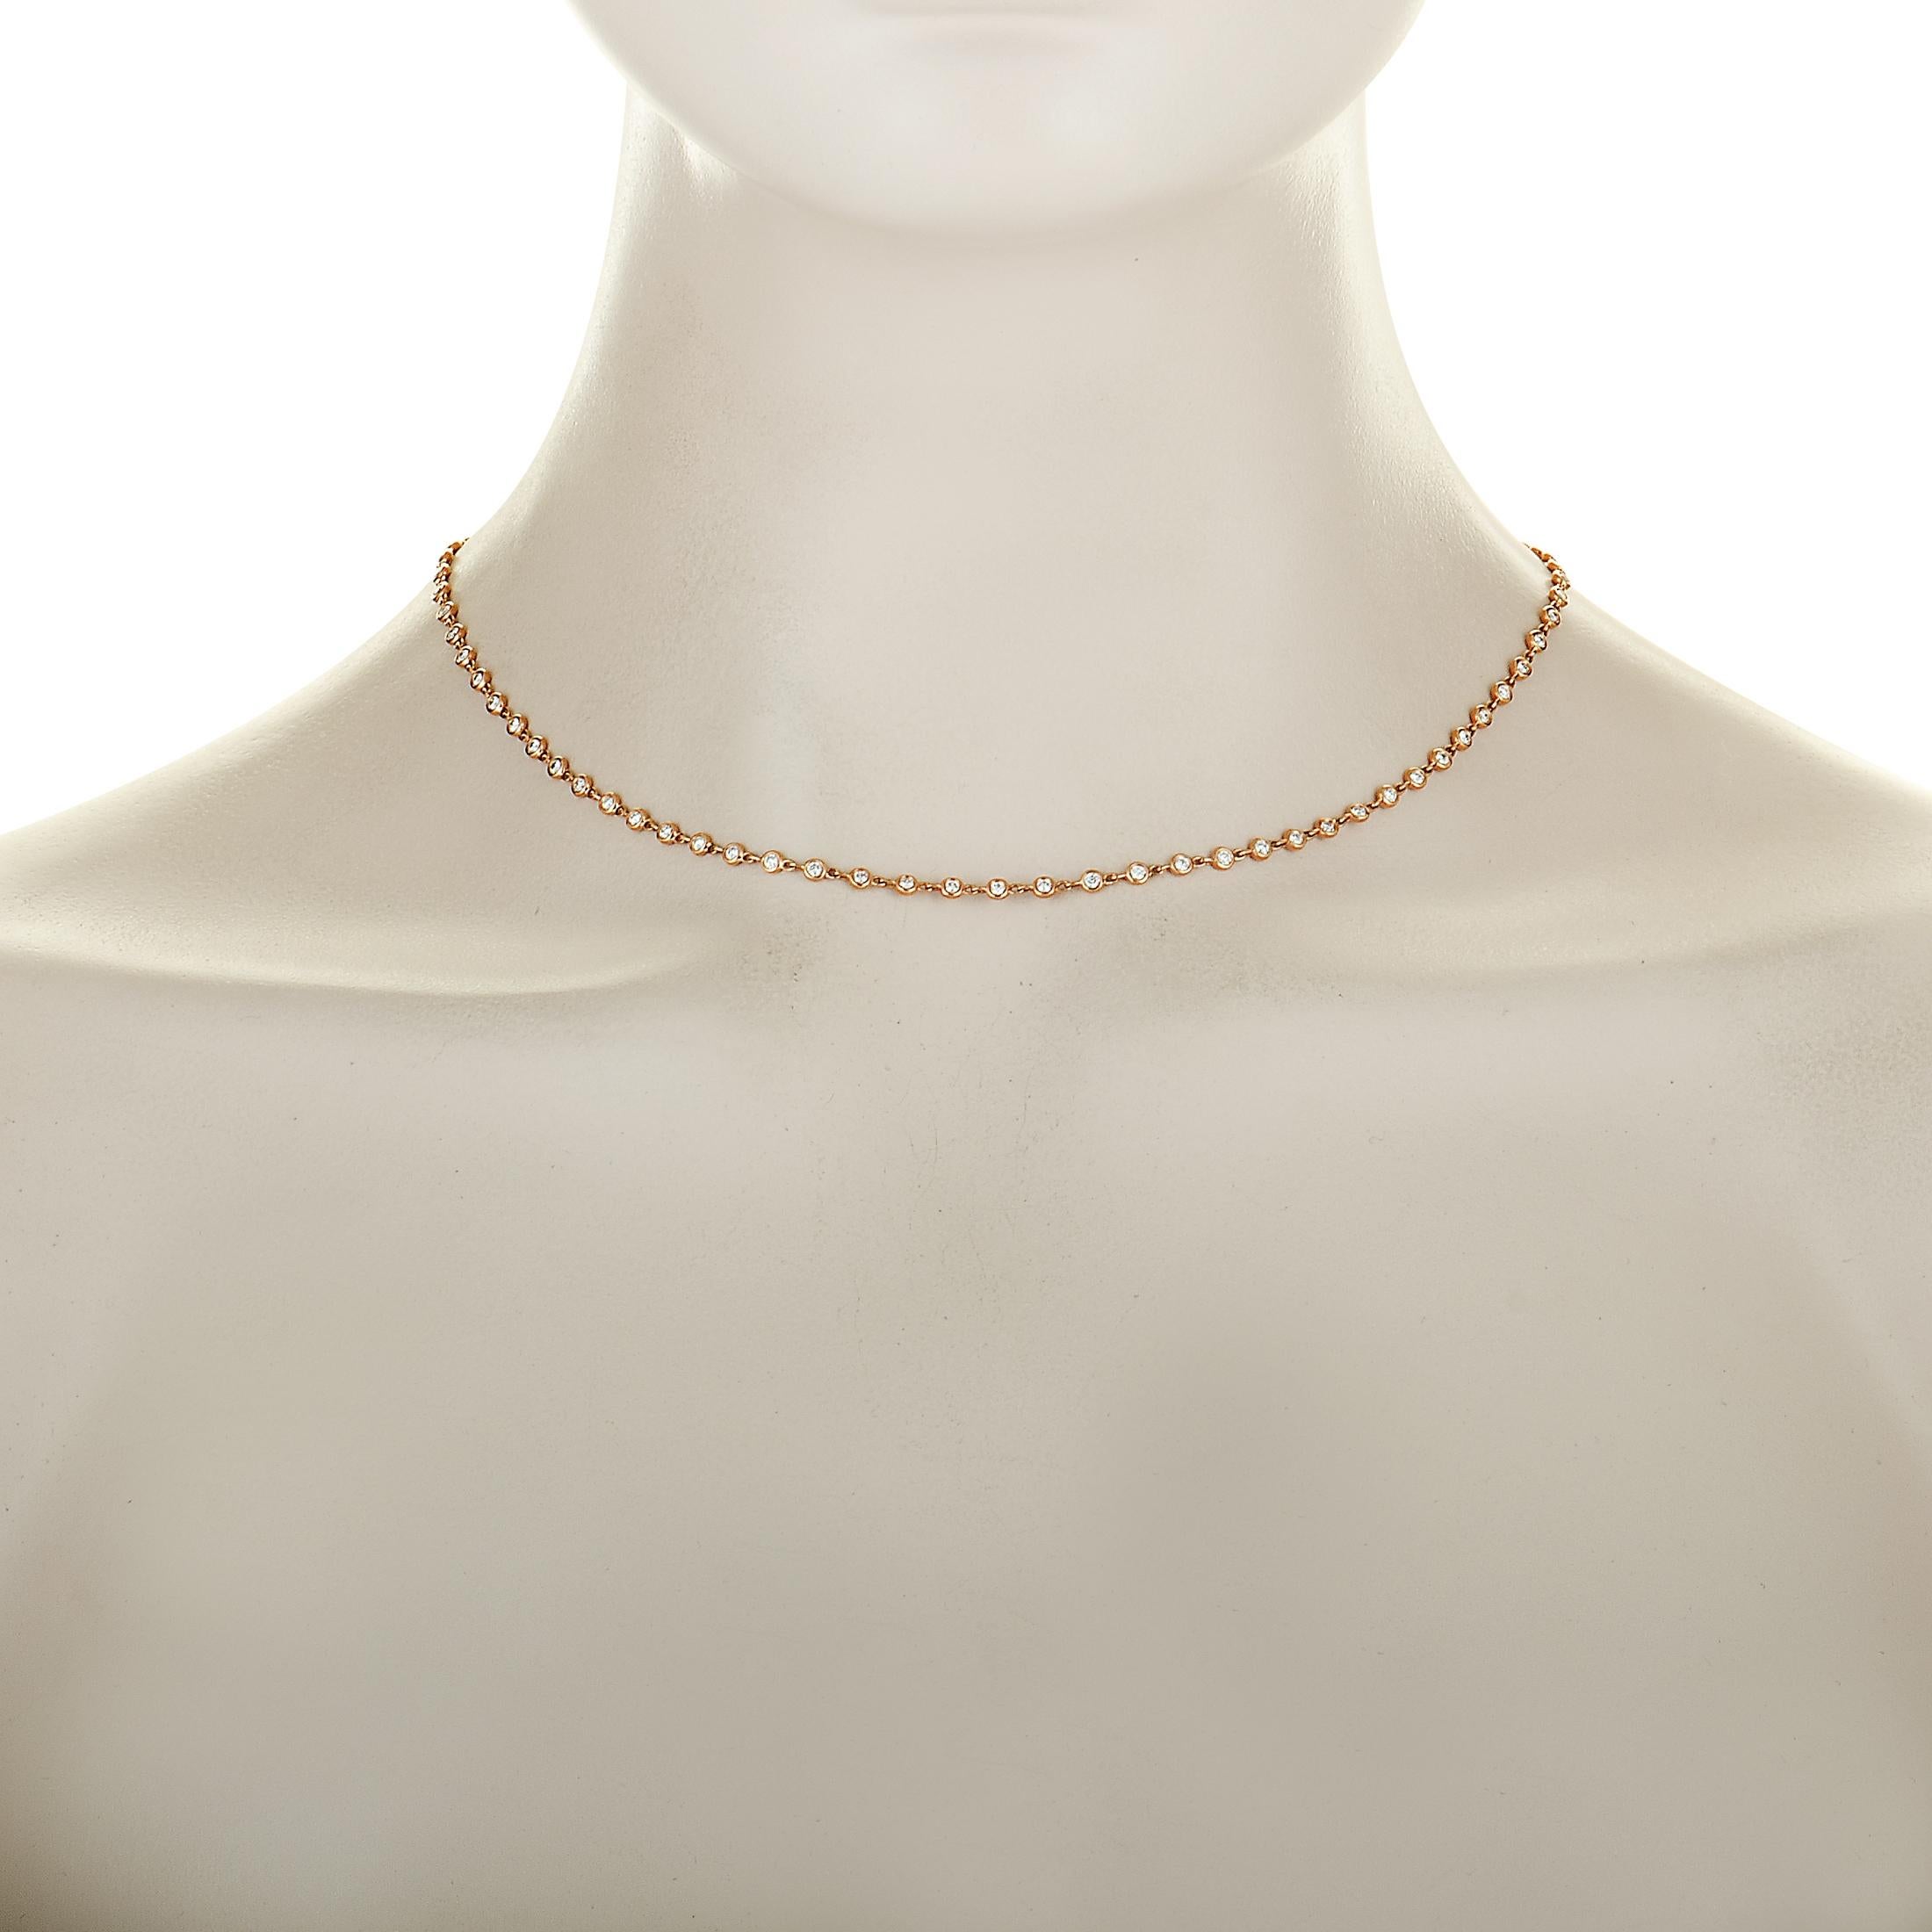 This LB Exclusive necklace is made of 18K rose gold and embellished with diamonds that total 2.15 carats. Measuring 17.00” in length, the necklace weighs 8.8 grams.

The necklace is offered in brand new condition and includes a gift box.